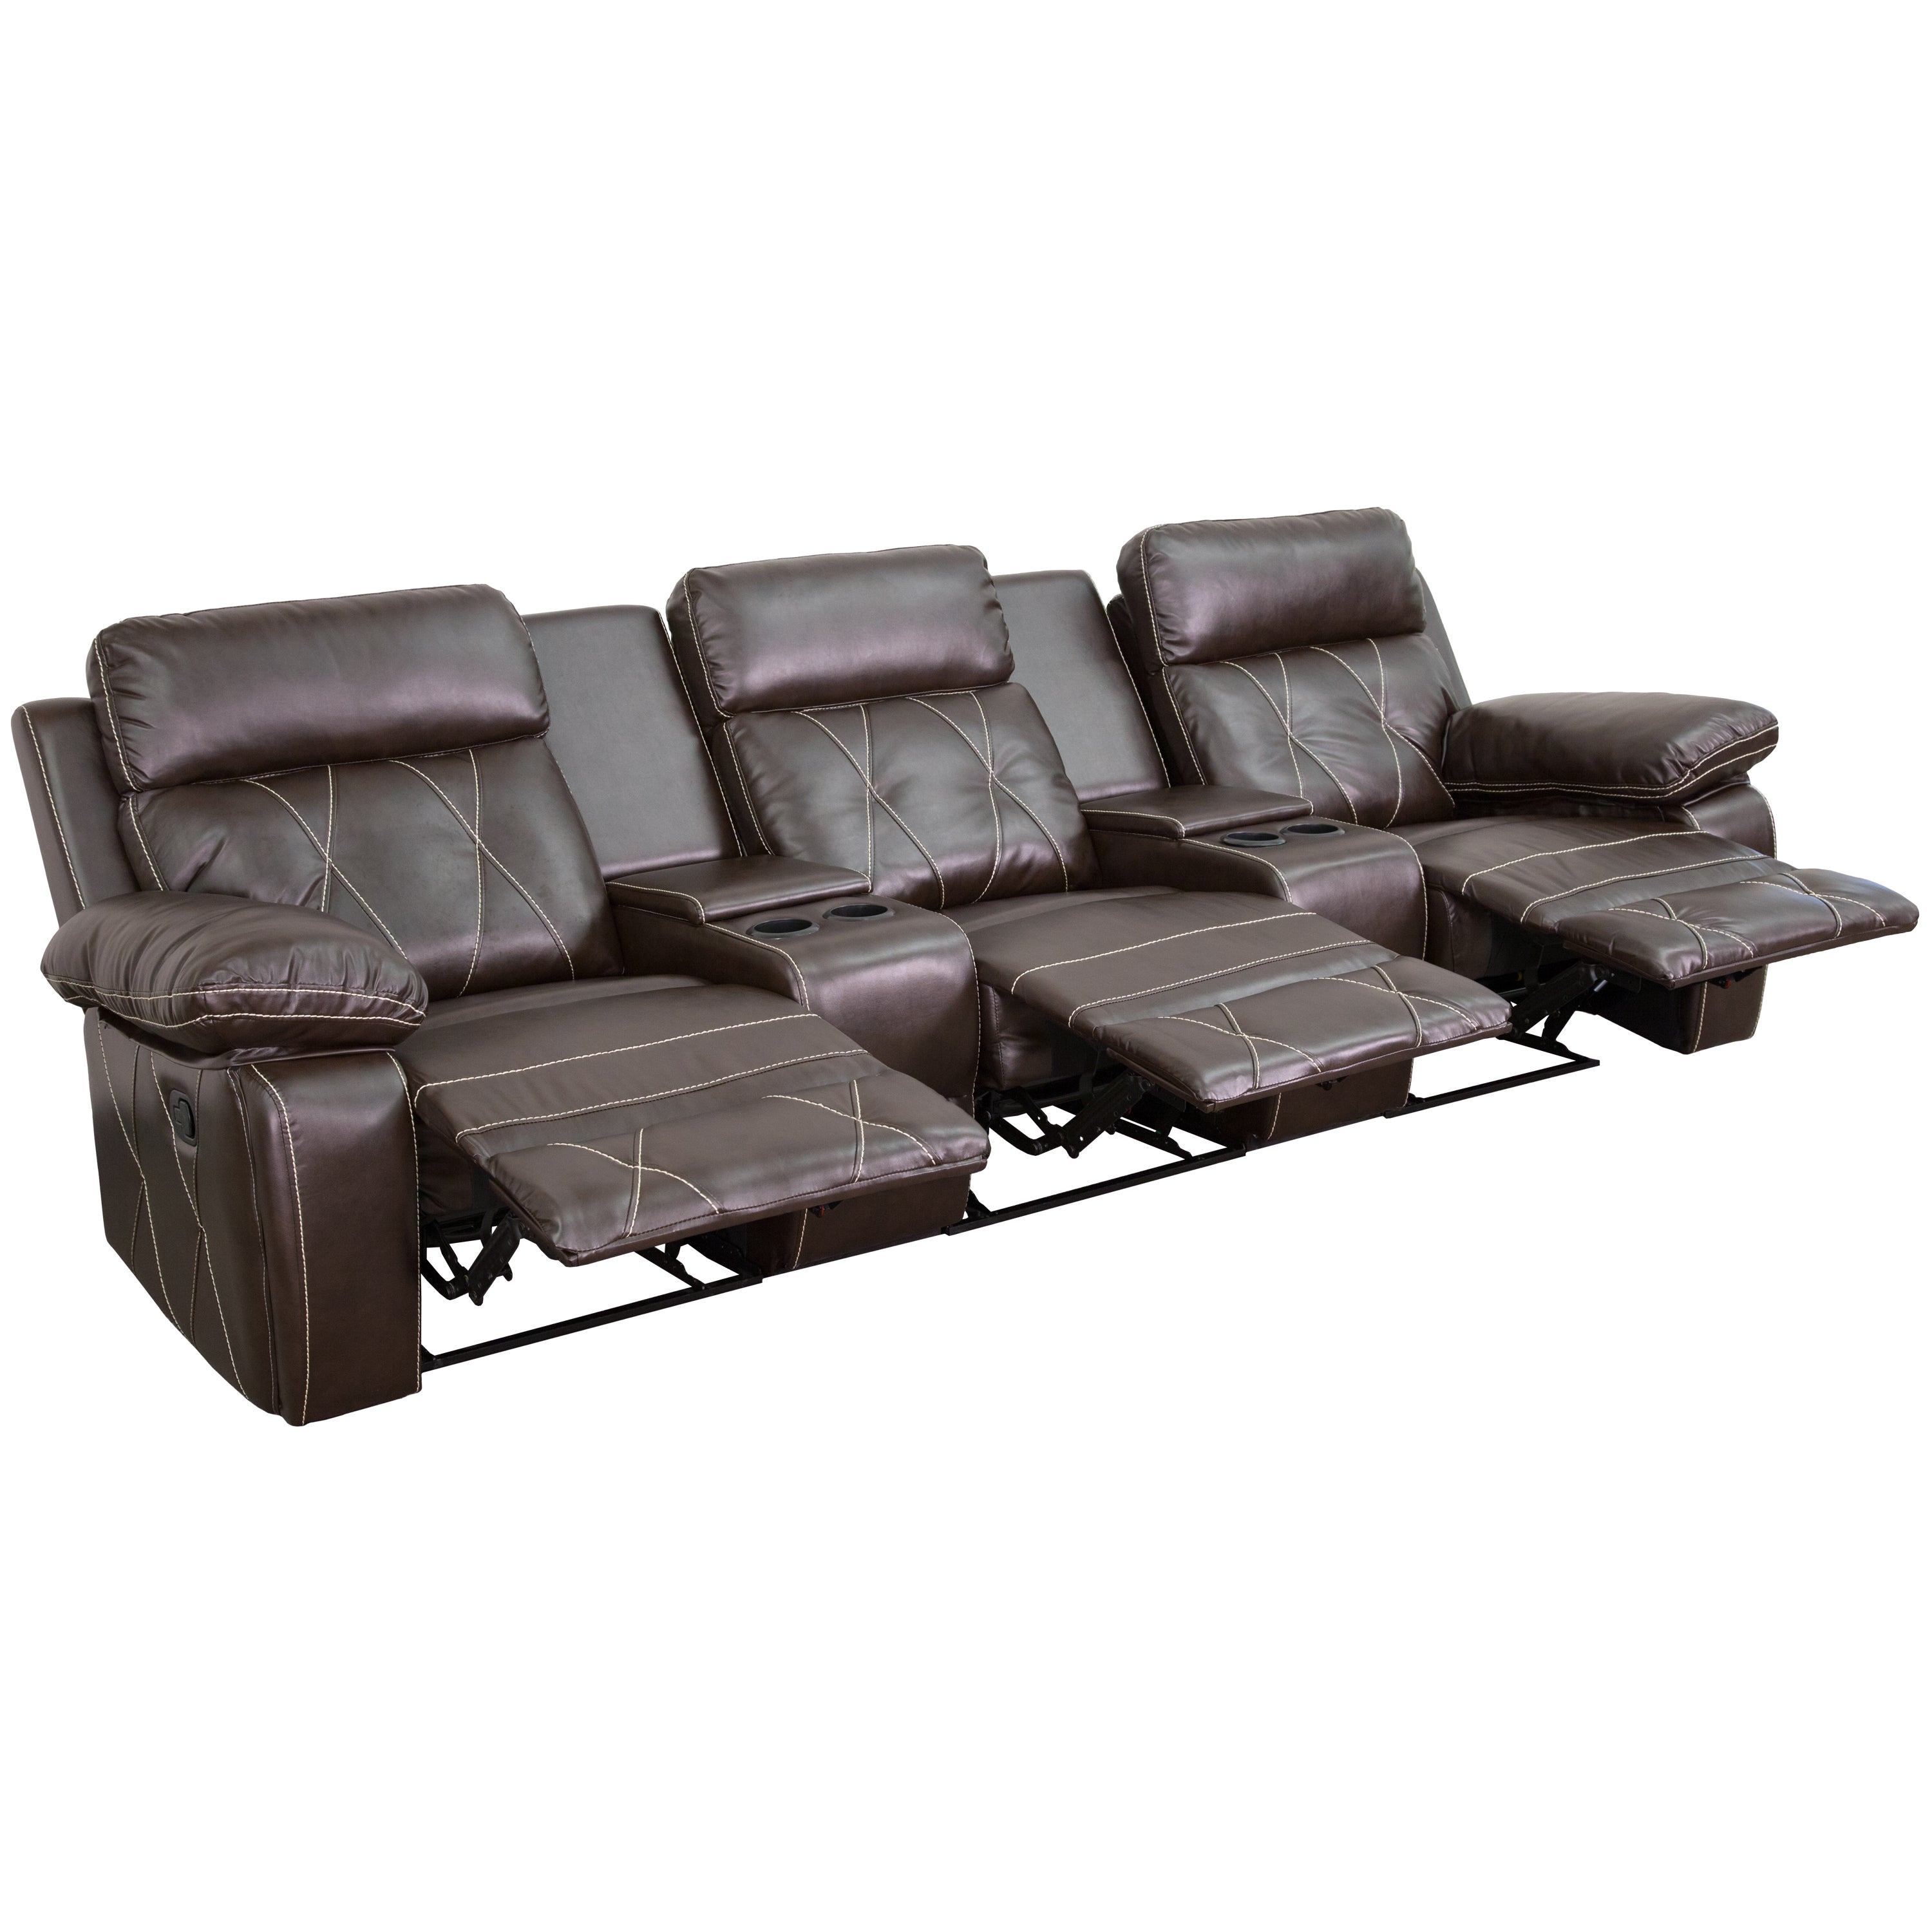 Reel Comfort Series 3-Seat Reclining LeatherSoft Theater Seating Unit with Straight Cup Holders-Theater Seating-Flash Furniture-Wall2Wall Furnishings